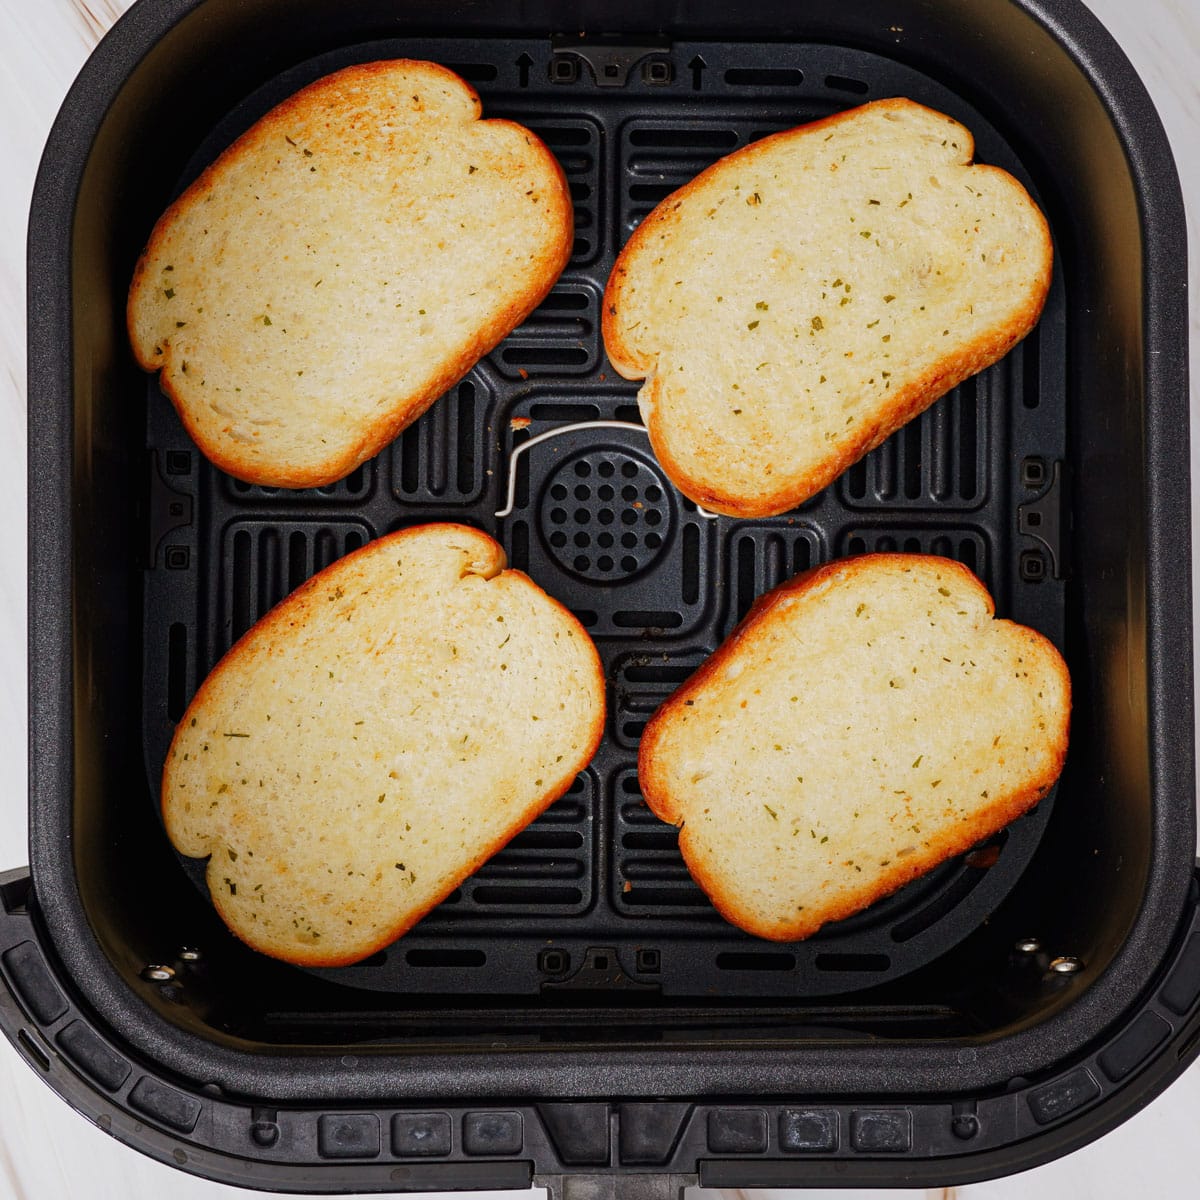 Cooking Texas toasts in air fryer